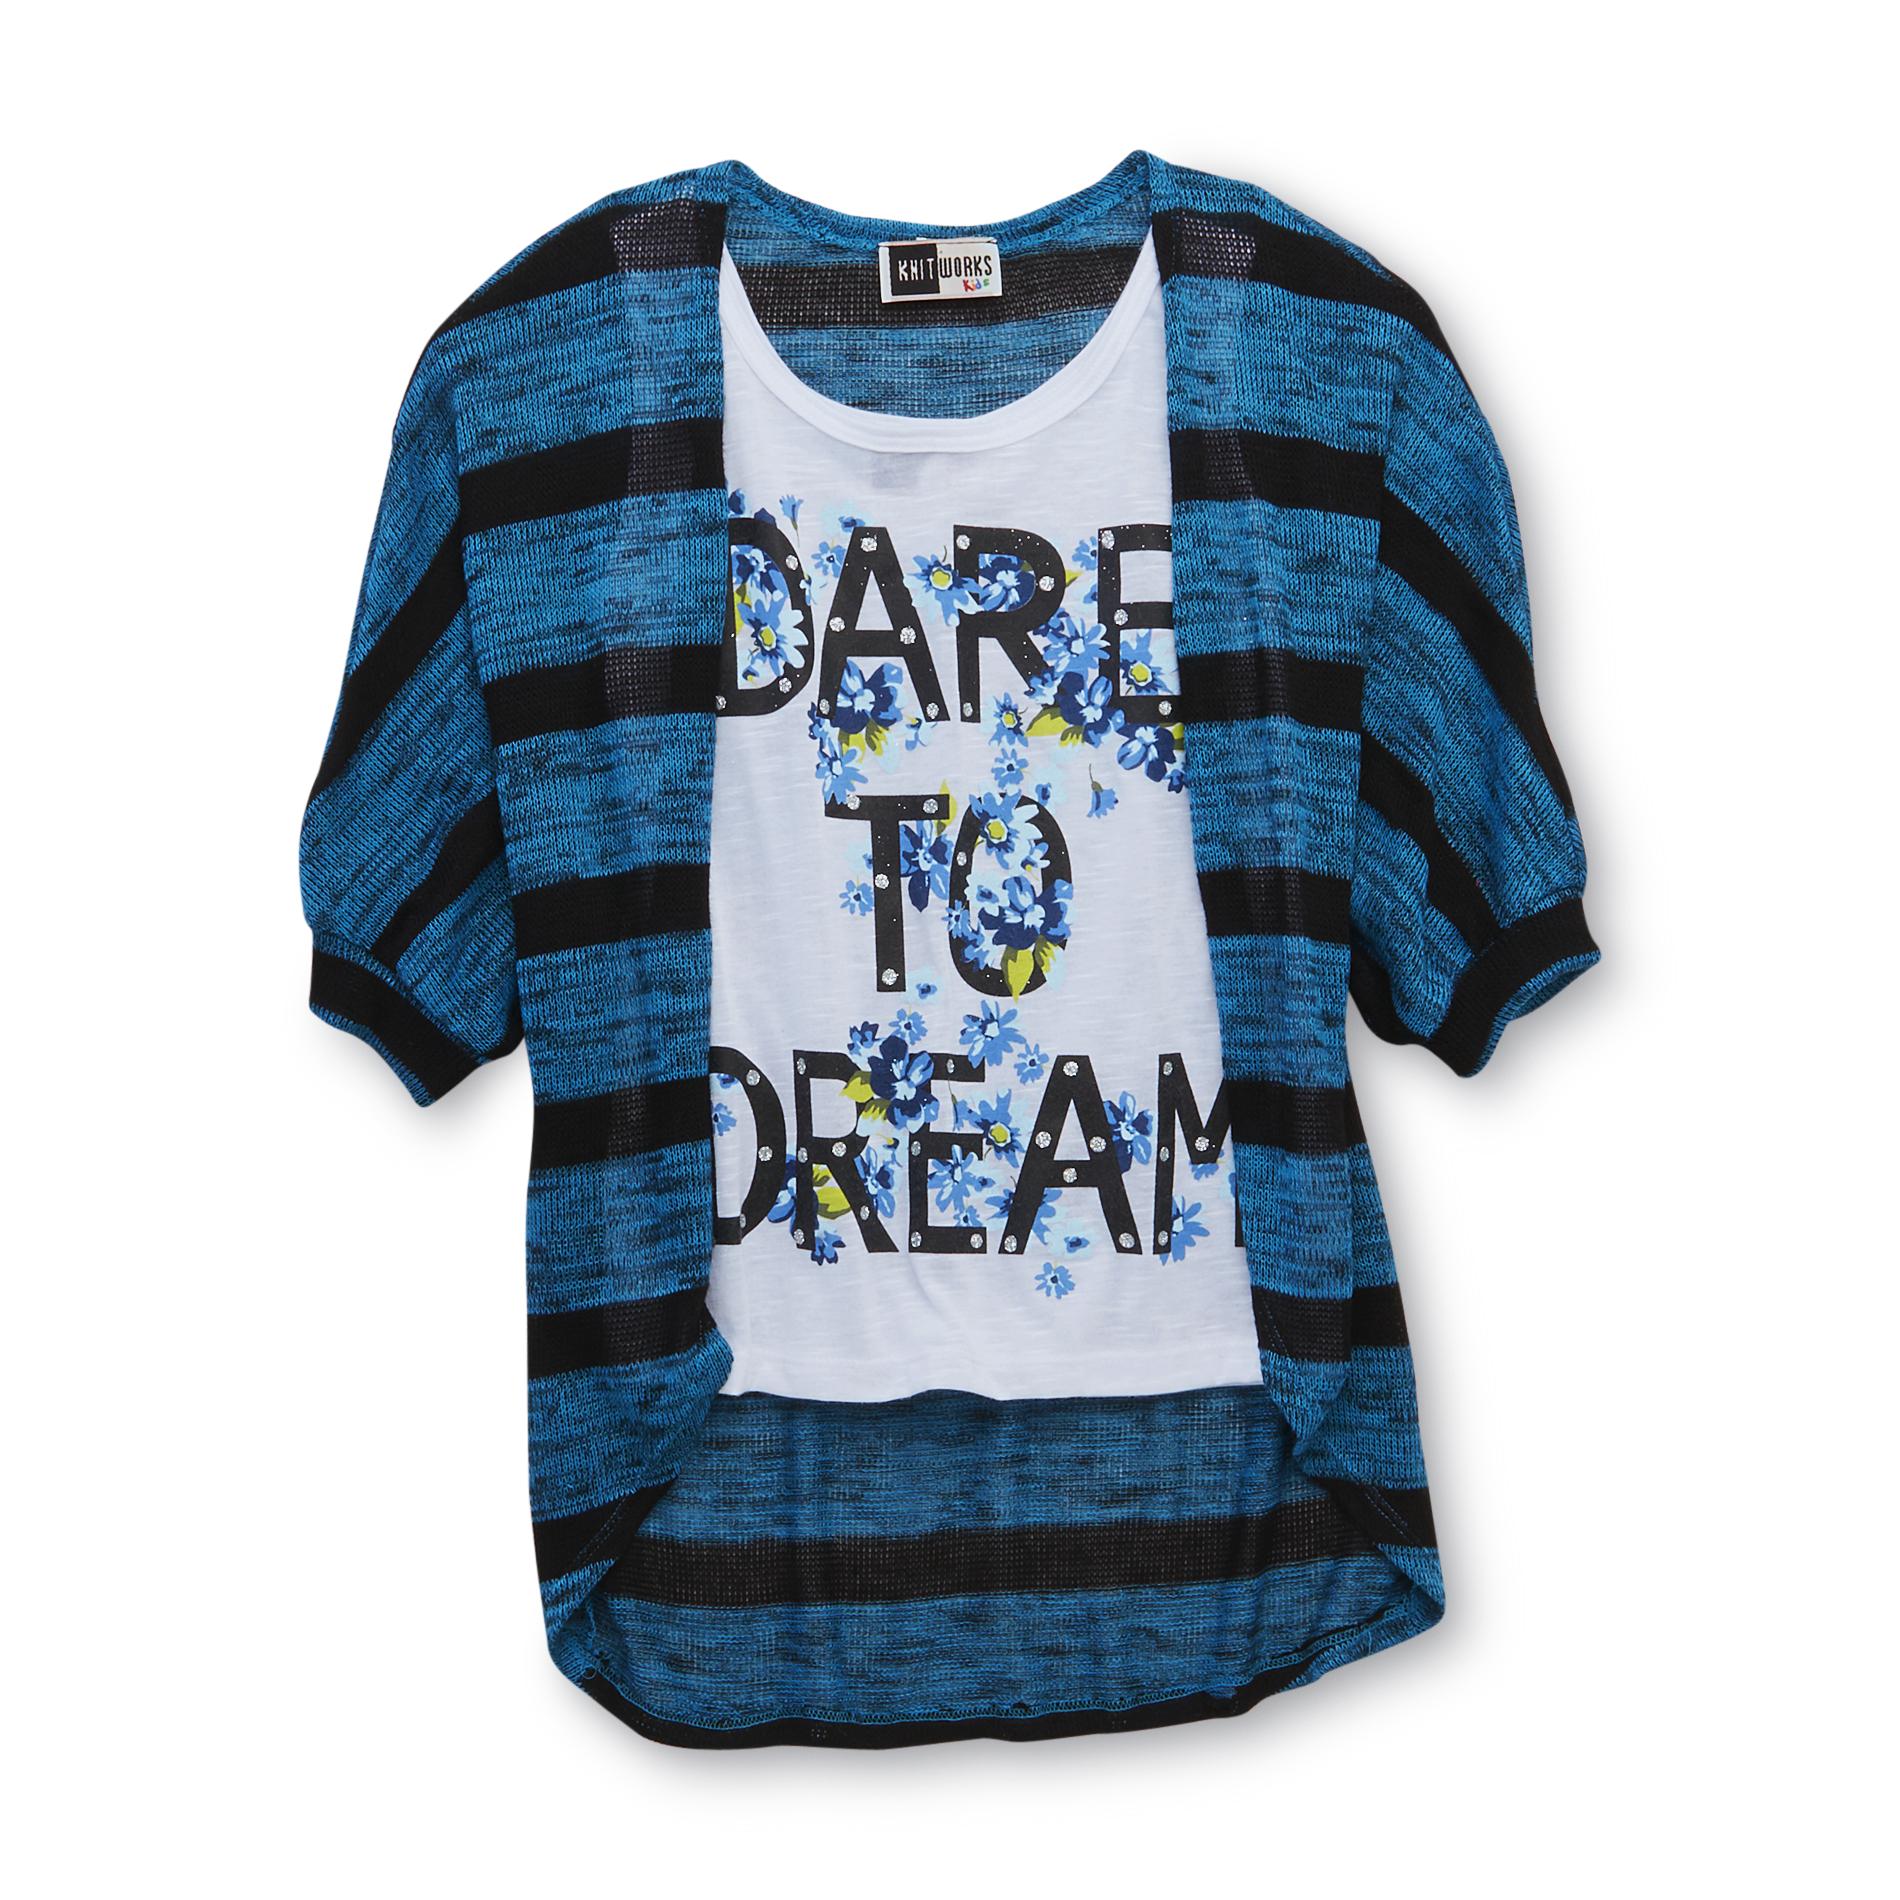 Knitworks Kids Girl's Graphic Tank Top & Striped Cardigan - Dream